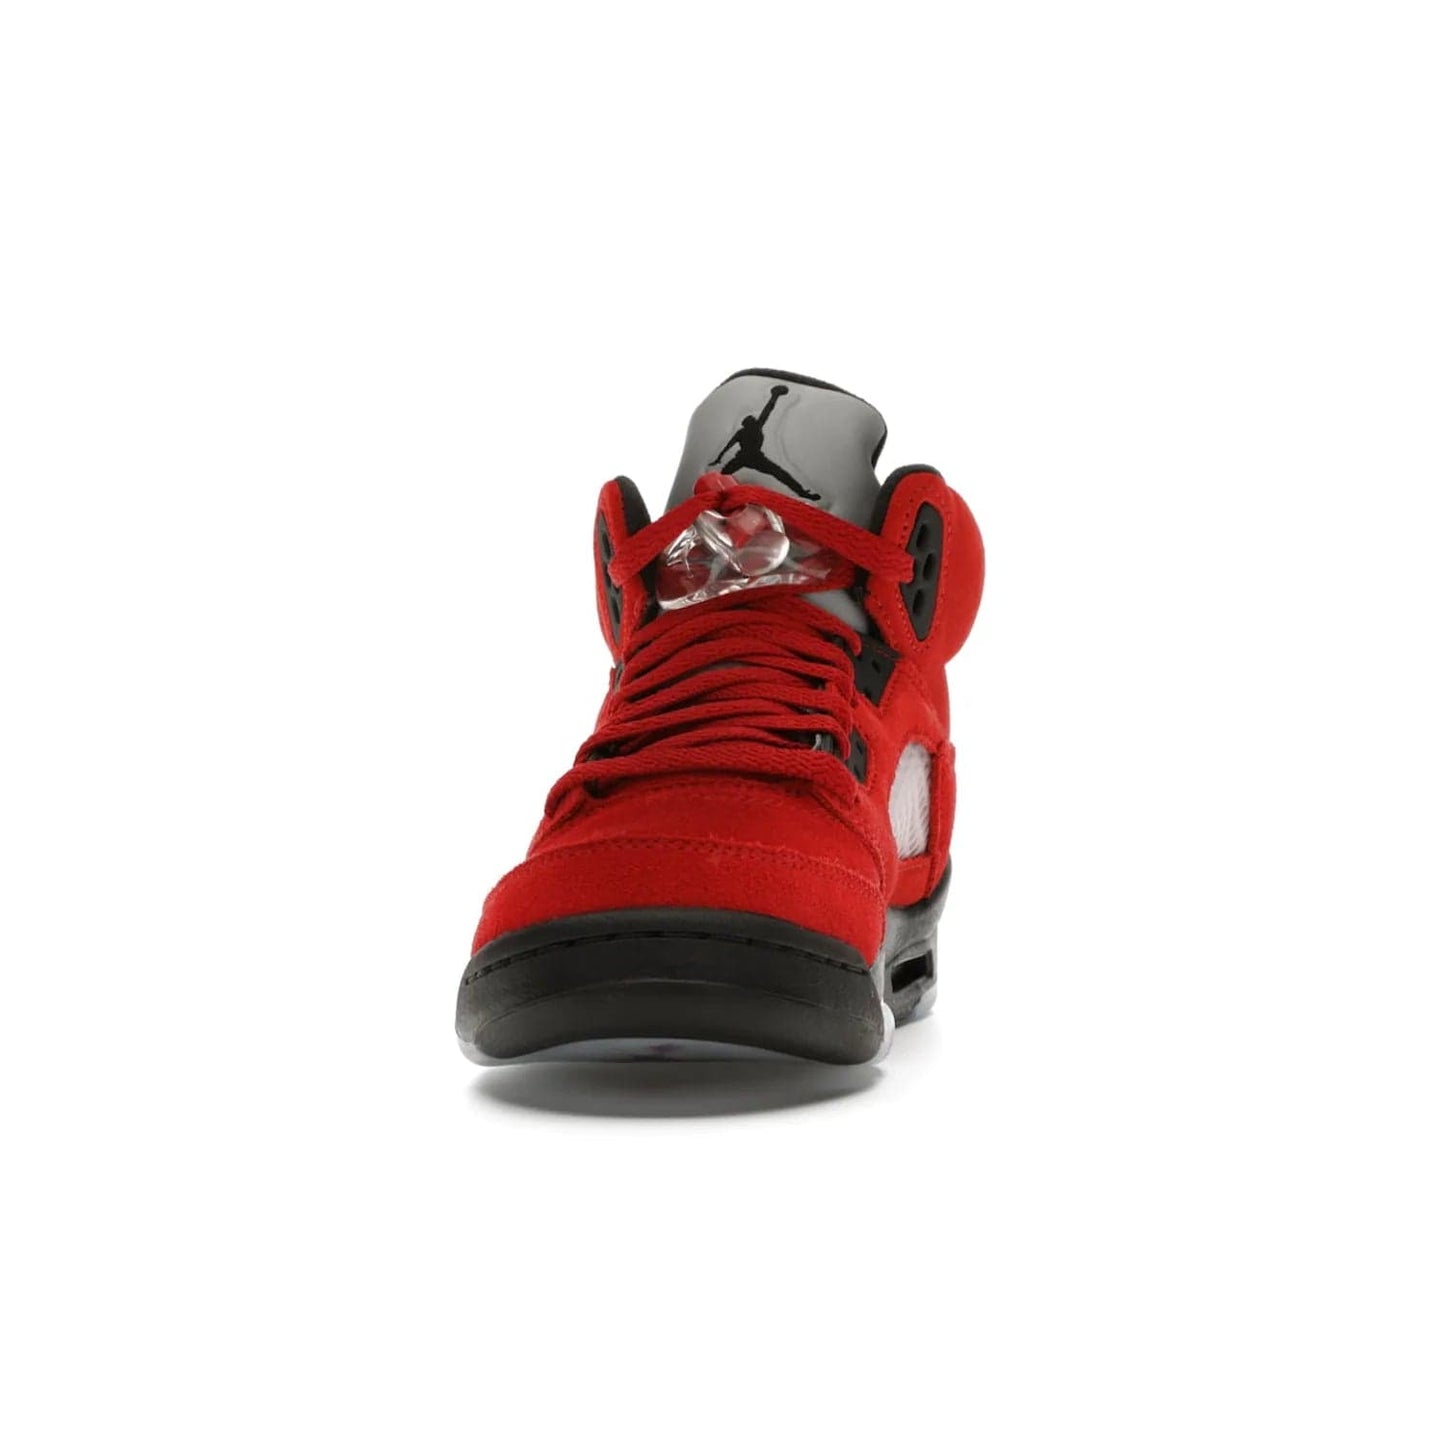 Jordan 5 Retro Raging Bull Red (2021) (GS) - Image 11 - Only at www.BallersClubKickz.com - Jordan 5 Retro Raging Bulls Red 2021 GS. Varsity Red suede upper with embroidered number 23, black leather detail, red laces, and midsole with air cushioning. Jumpman logos on tongue, heel, and outsole. On-trend streetwear and basketball style. Released April 10, 2021.